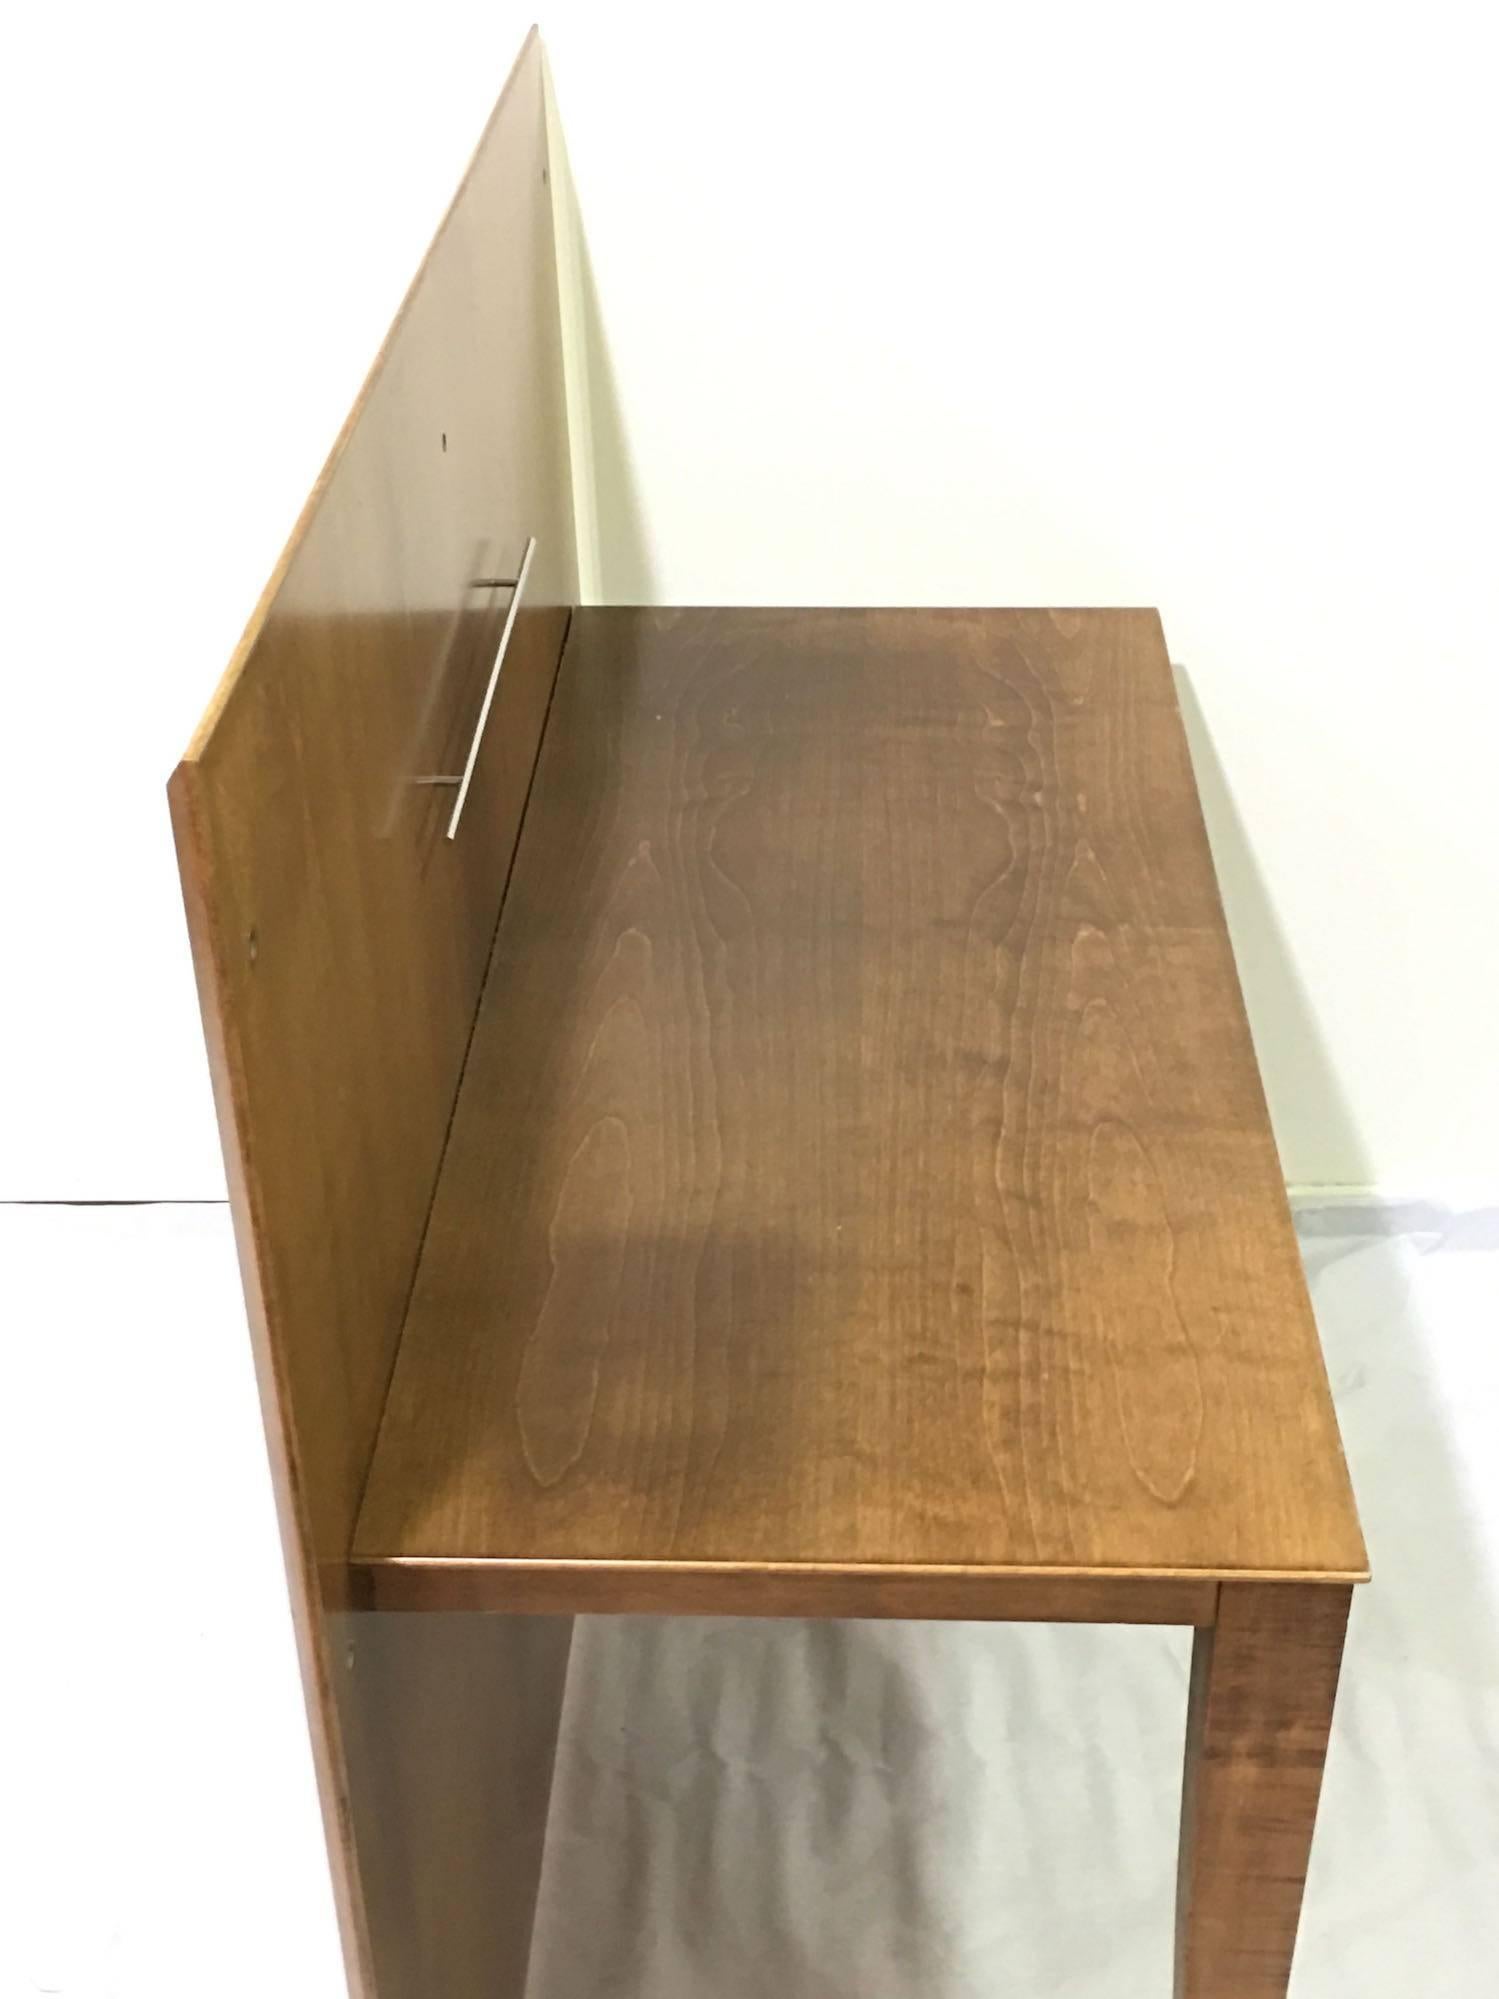 This refined sycamore varnished desk with two drawers, was designed and manufactured by Christian Liaigre for Hotel Montalembert in 1990. With this first design project of a luxury hotel, Christian Liaigre acquires its international dimension. For